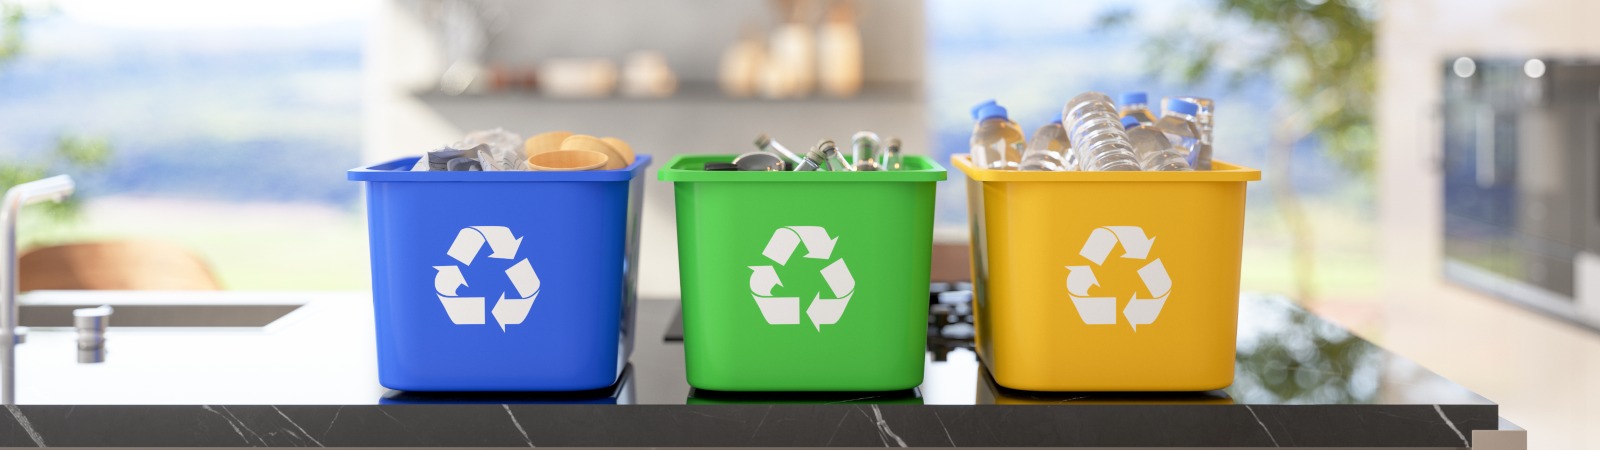 imgReduce, Reuse, Recycle - 3Rs of Waste Management for Environmental Sustainability